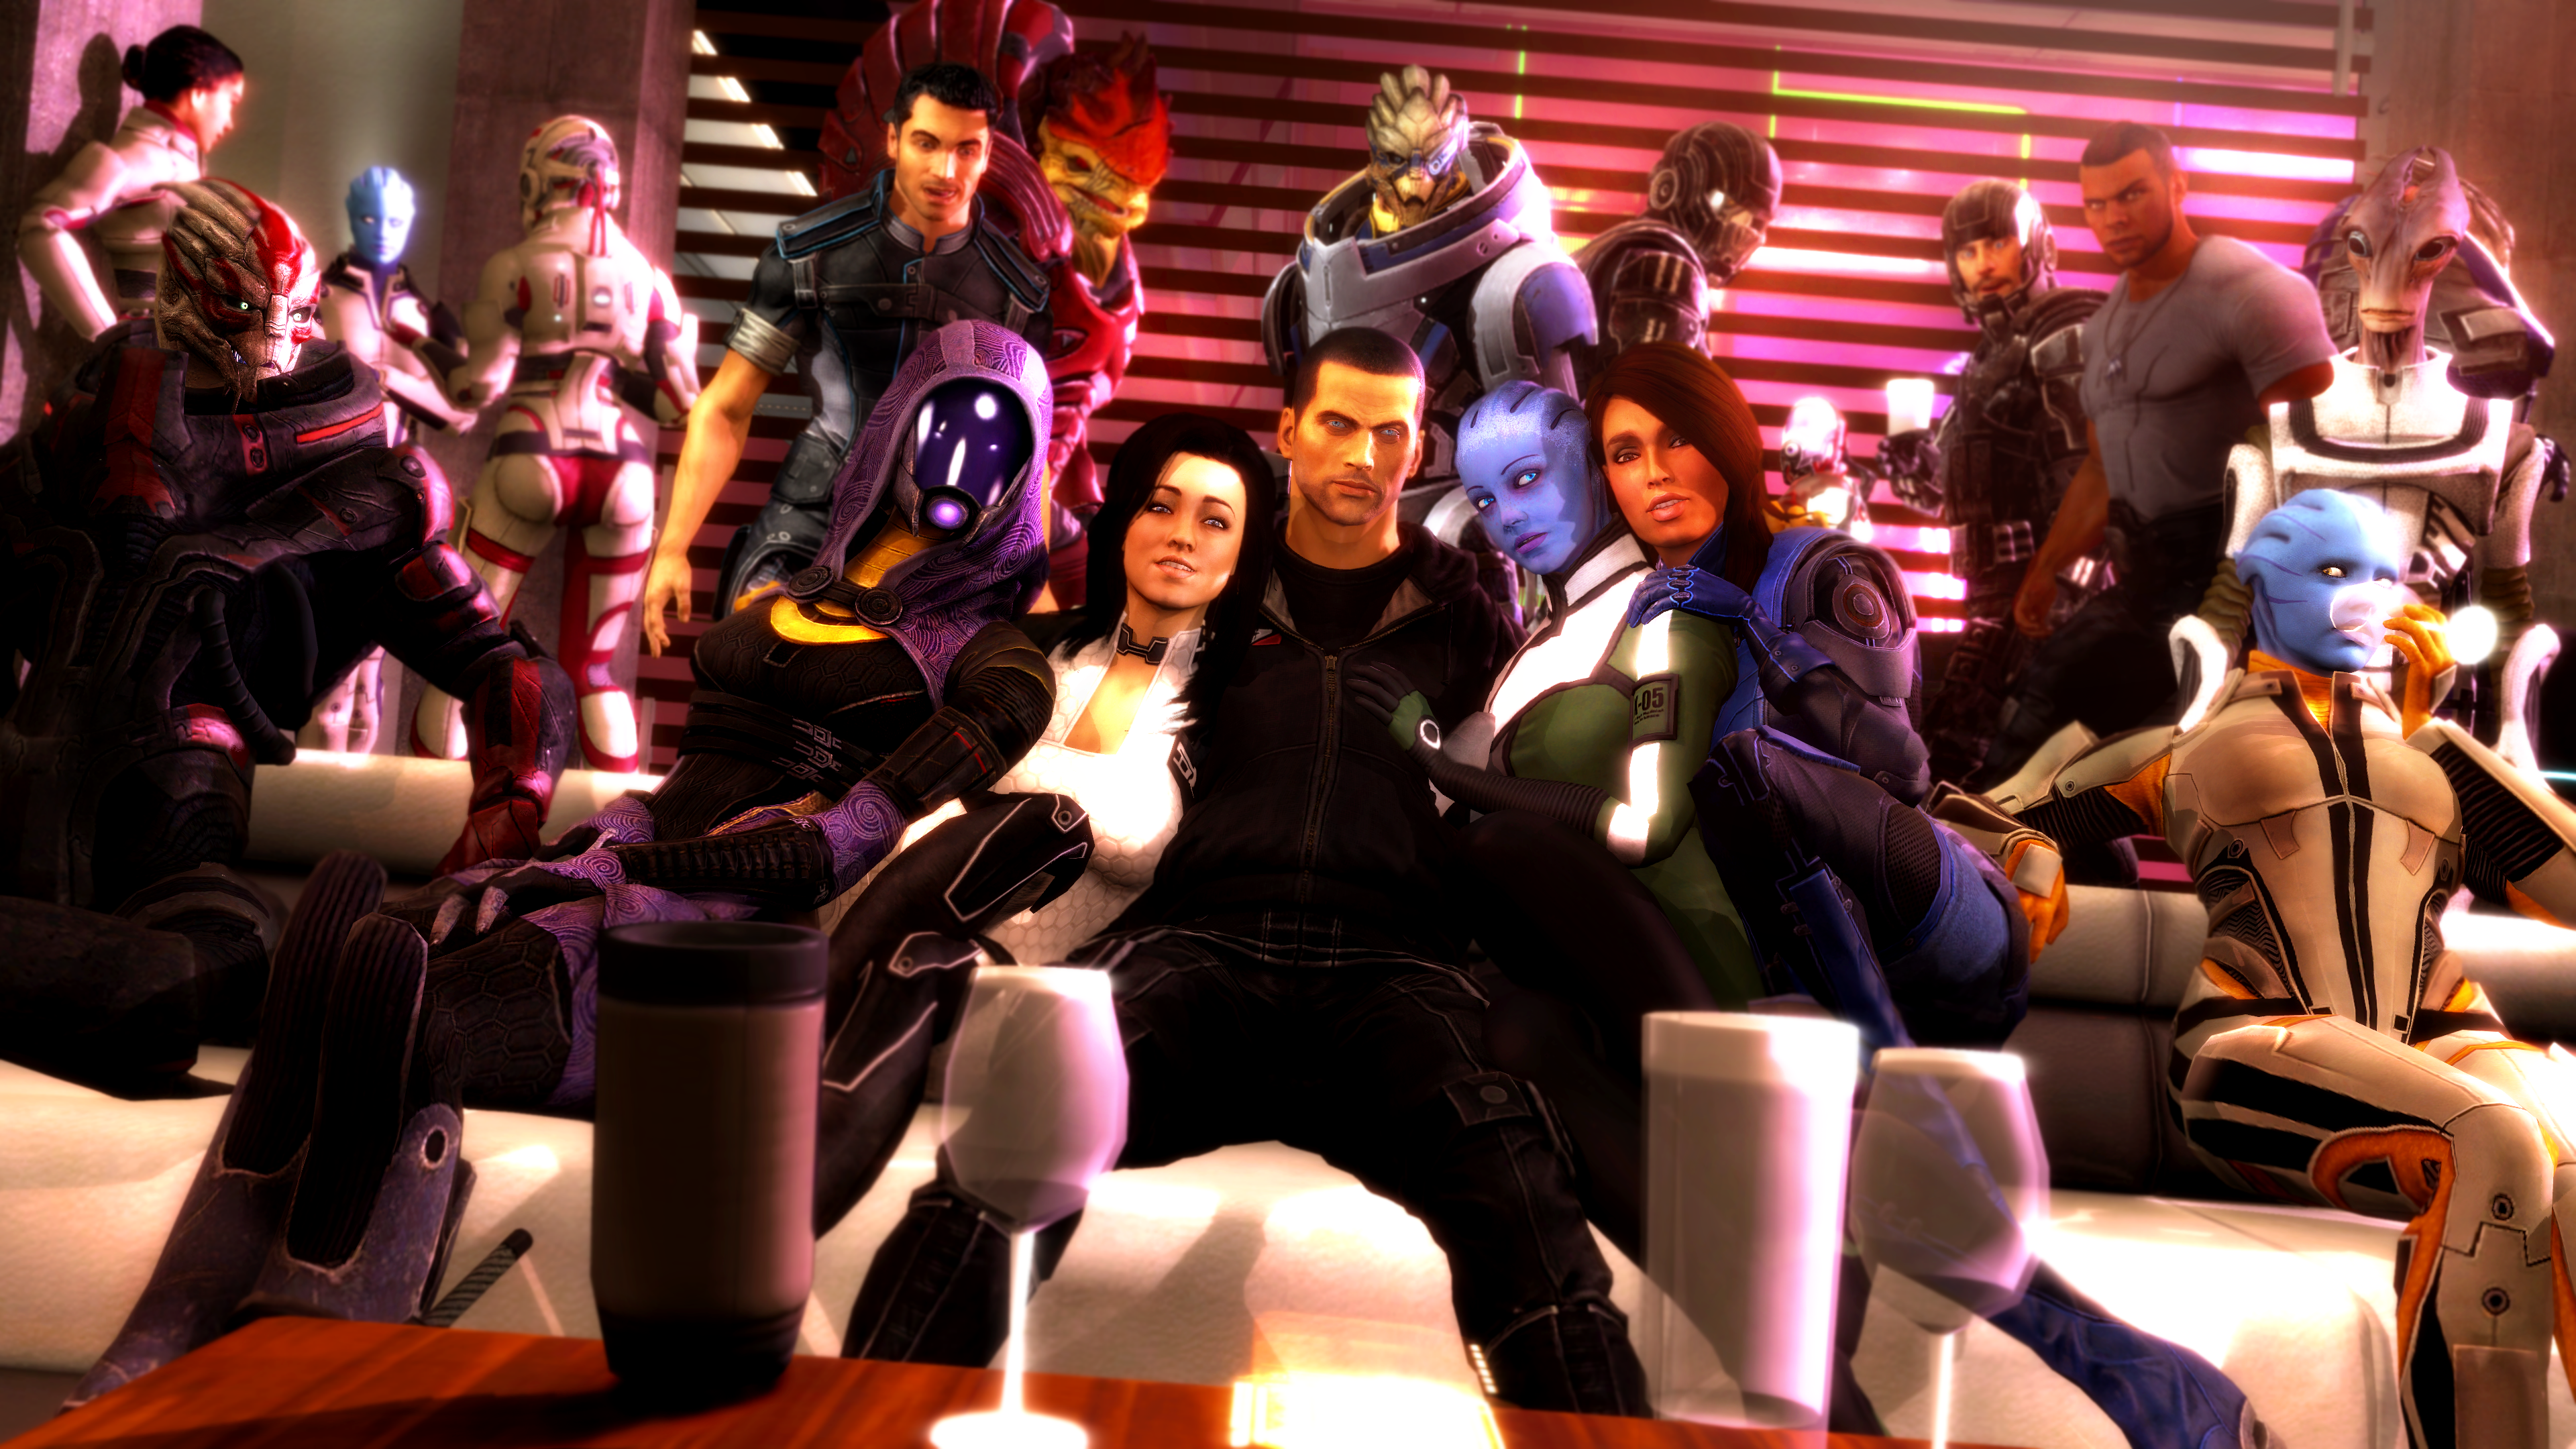 shepard_s_chill_party_by_lordhayabusa357-d9usffm.png